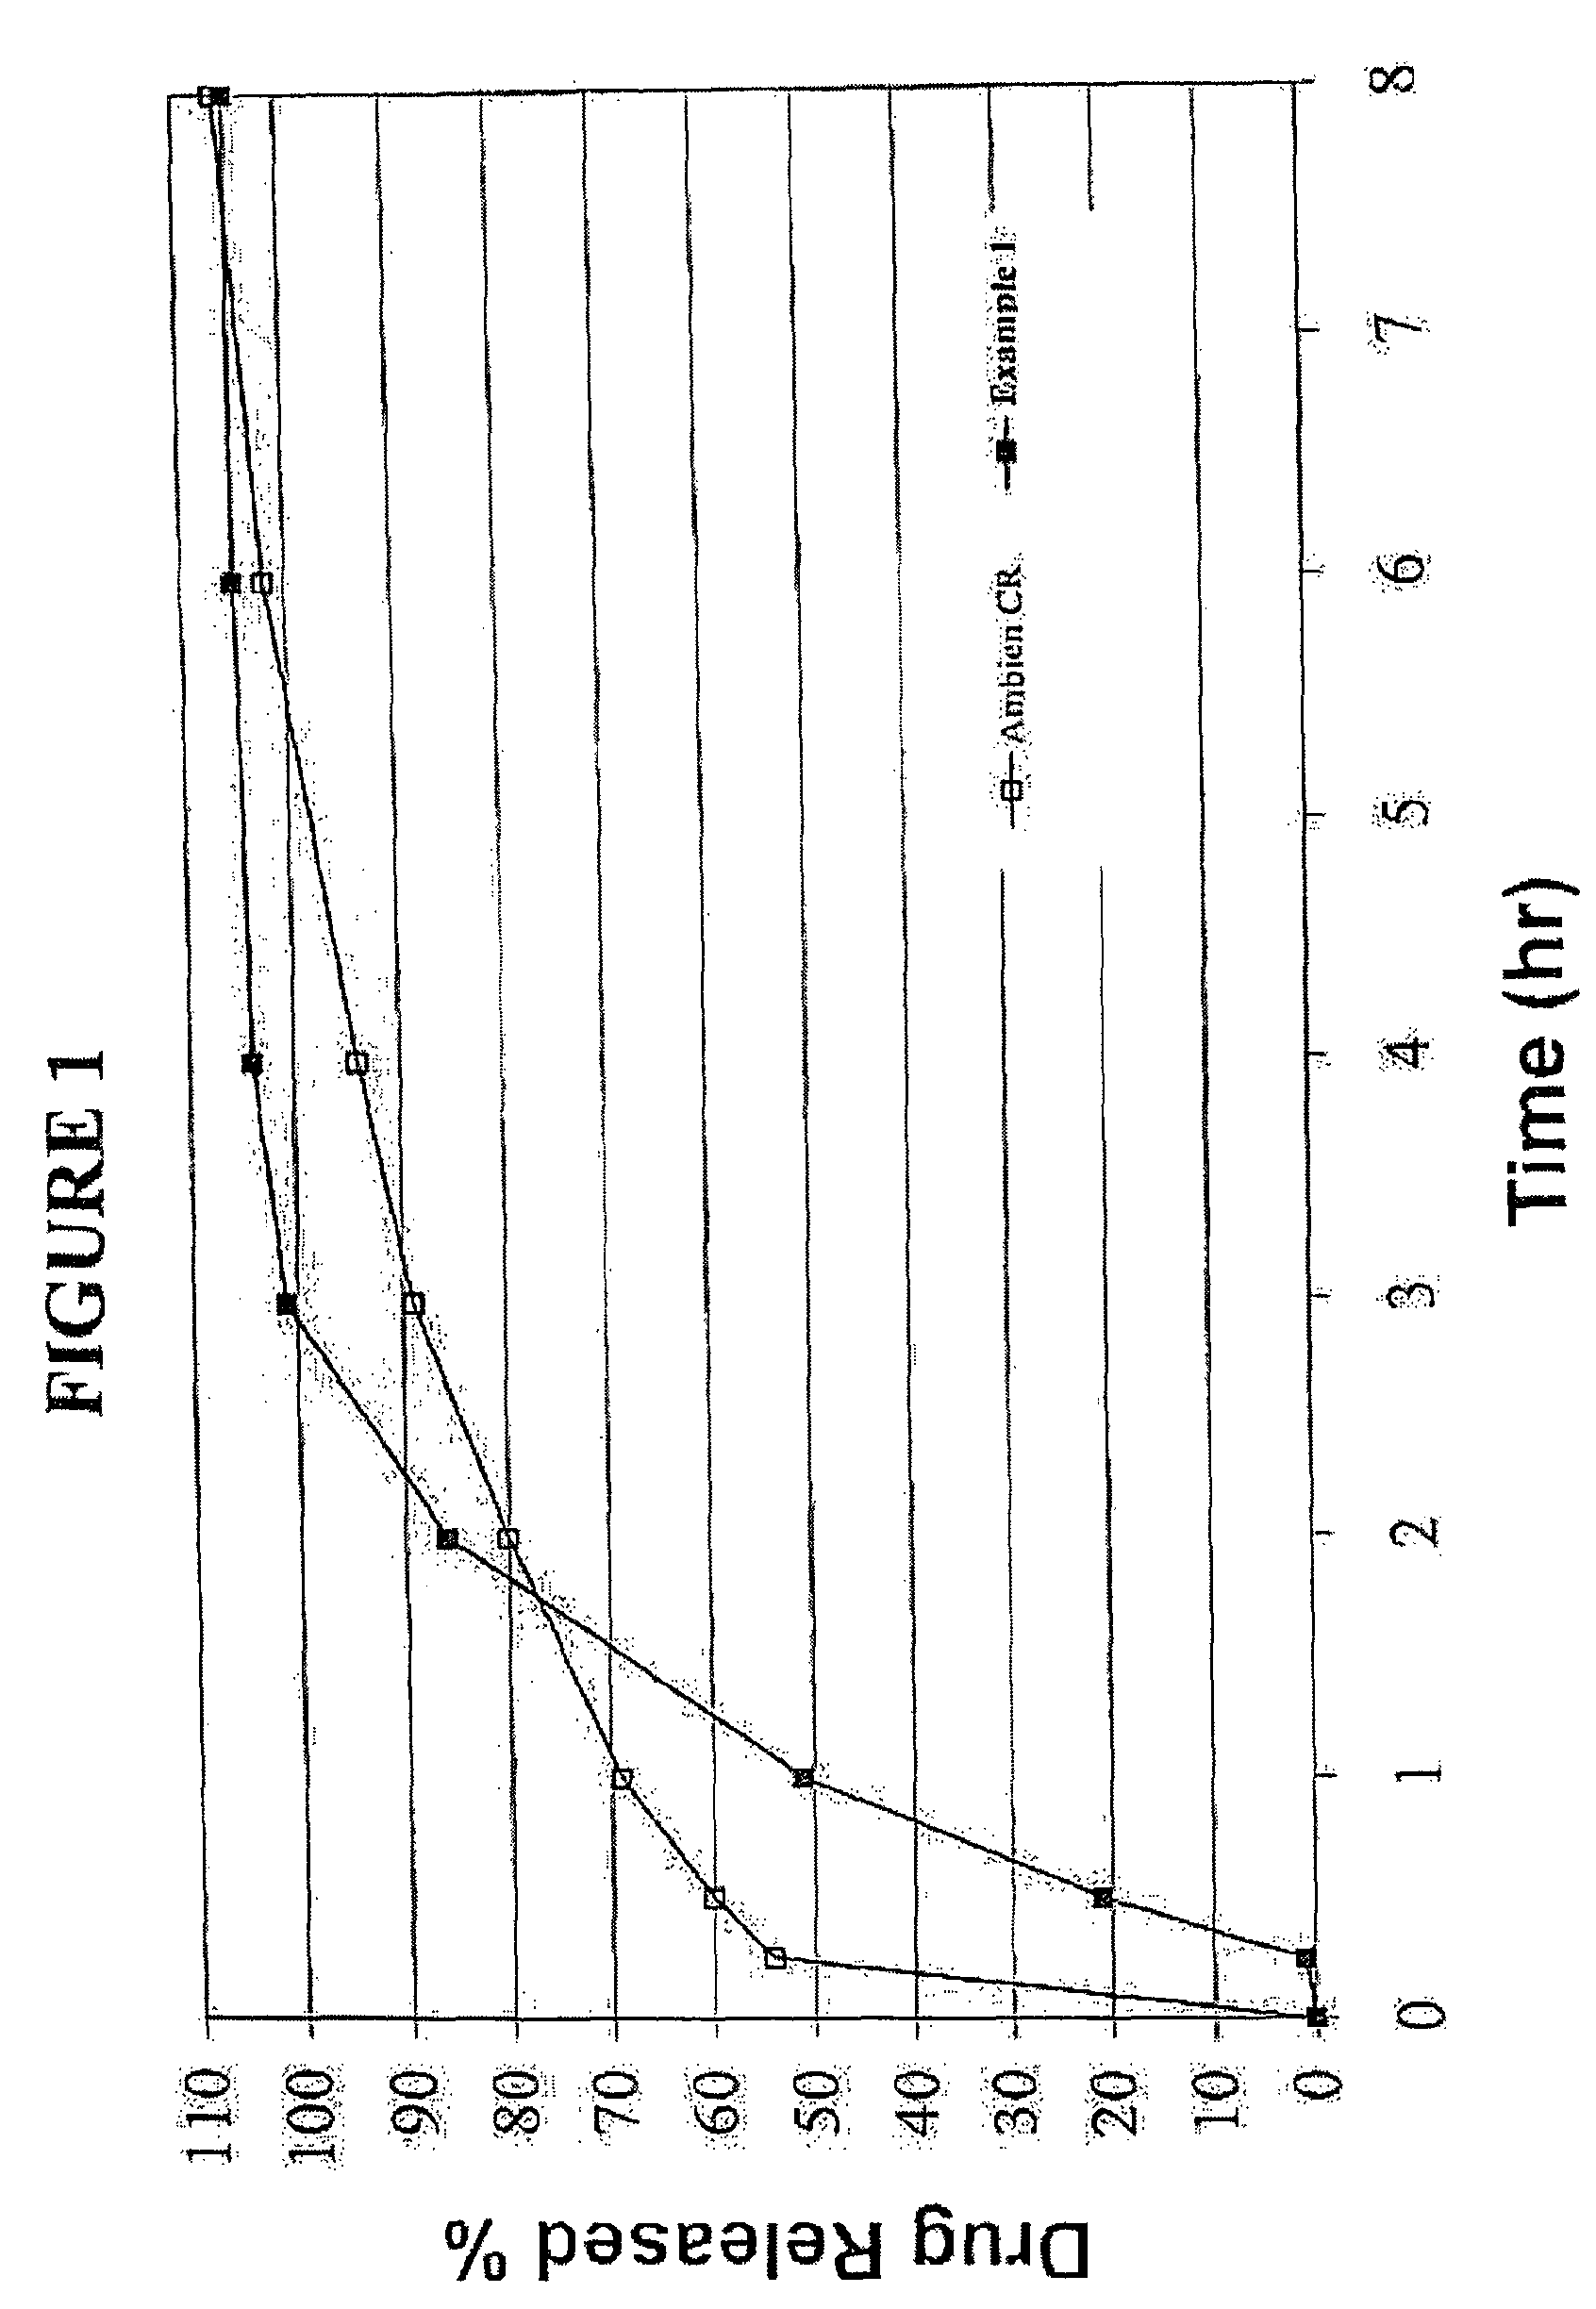 Oral controlled release formulation for sedative and hypnotic agents